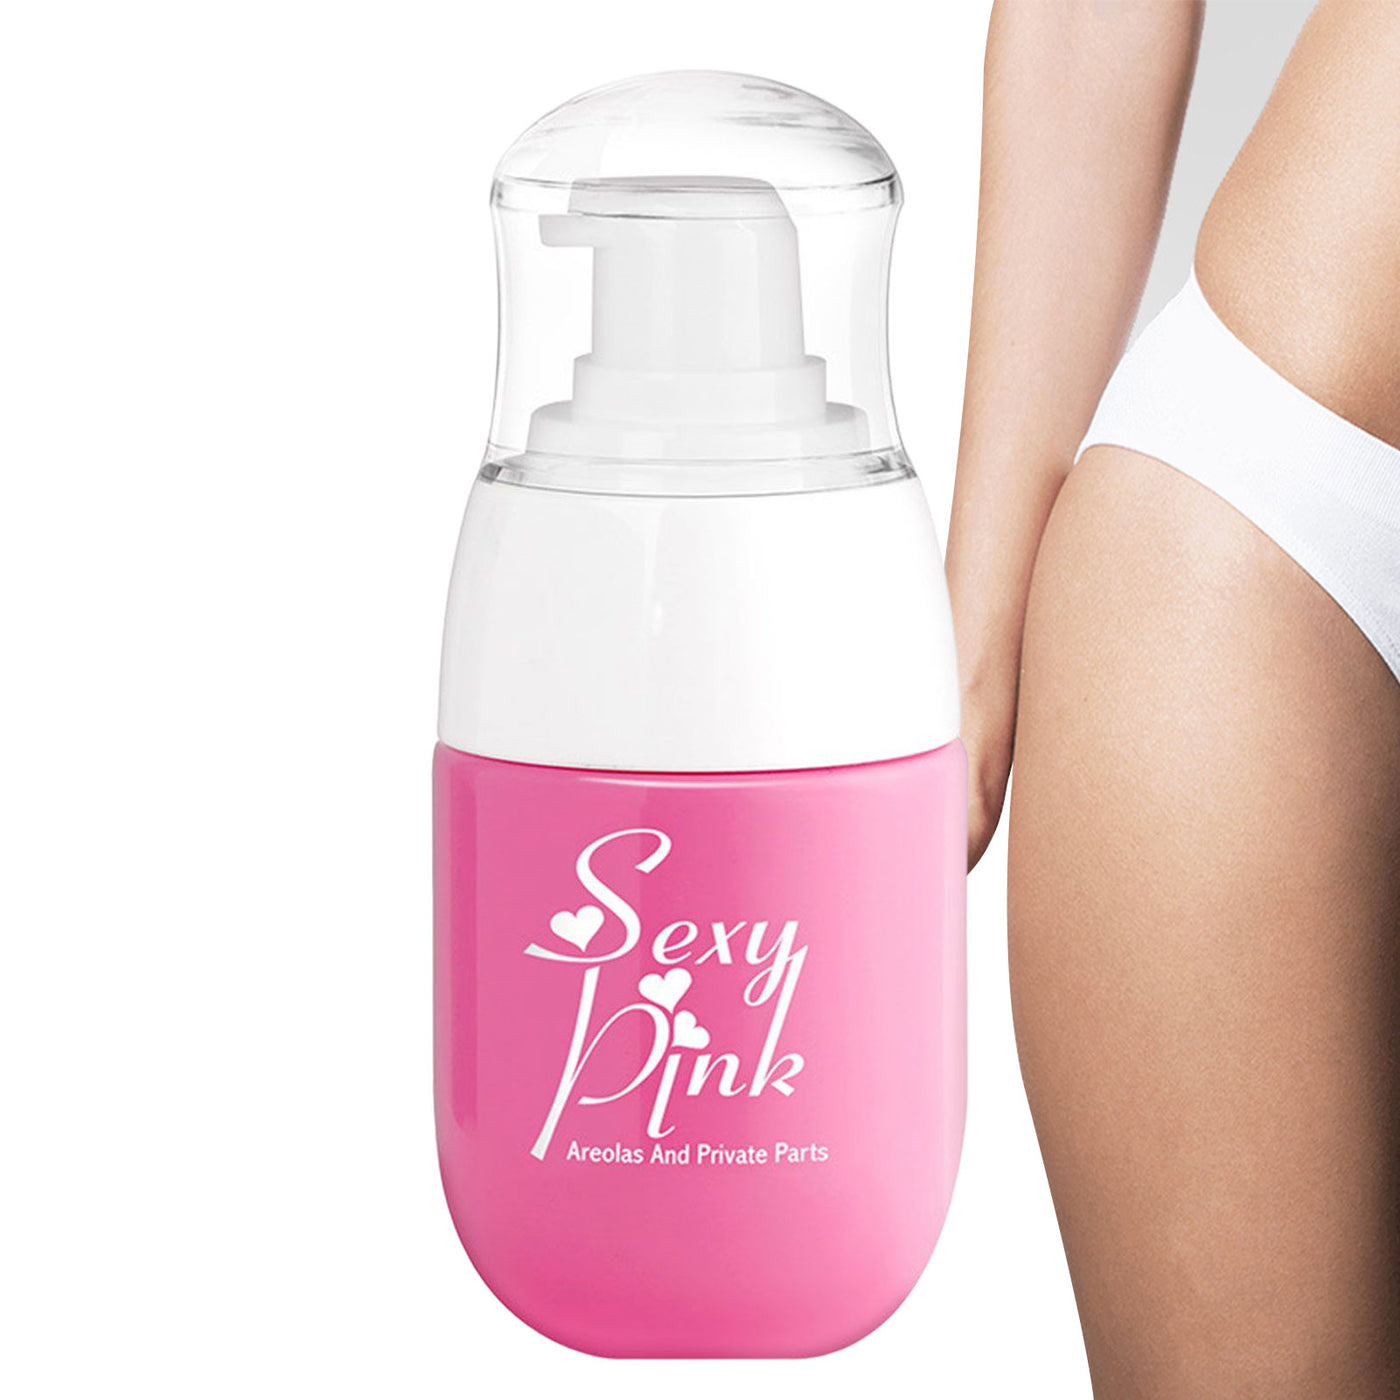 Moisturizing Cream/Lotion/Oil To Keep Nipples and Vaginal Lips Pink.  Made From Natural Plant Extract.  Results May Vary.